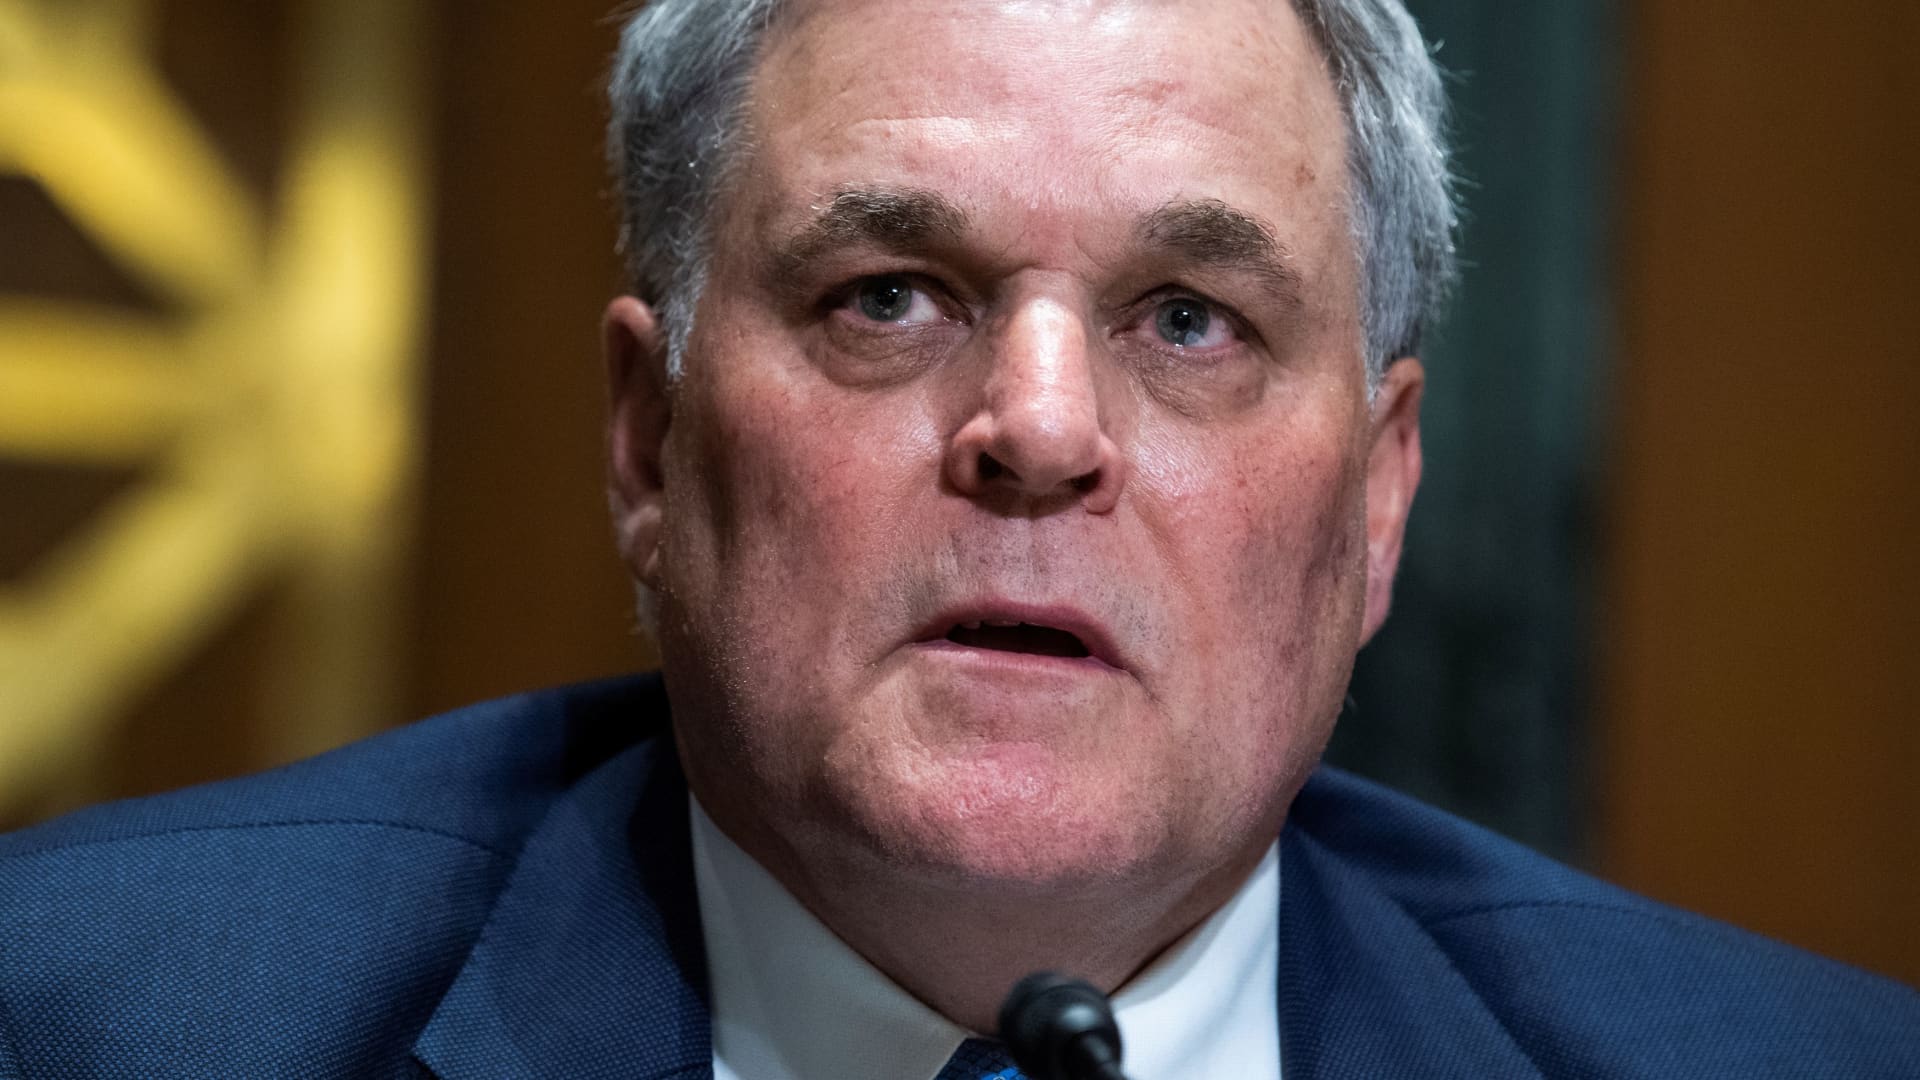 Tax return backlog will ‘absolutely’ clear by end of 2022, says IRS commissioner Charles Rettig